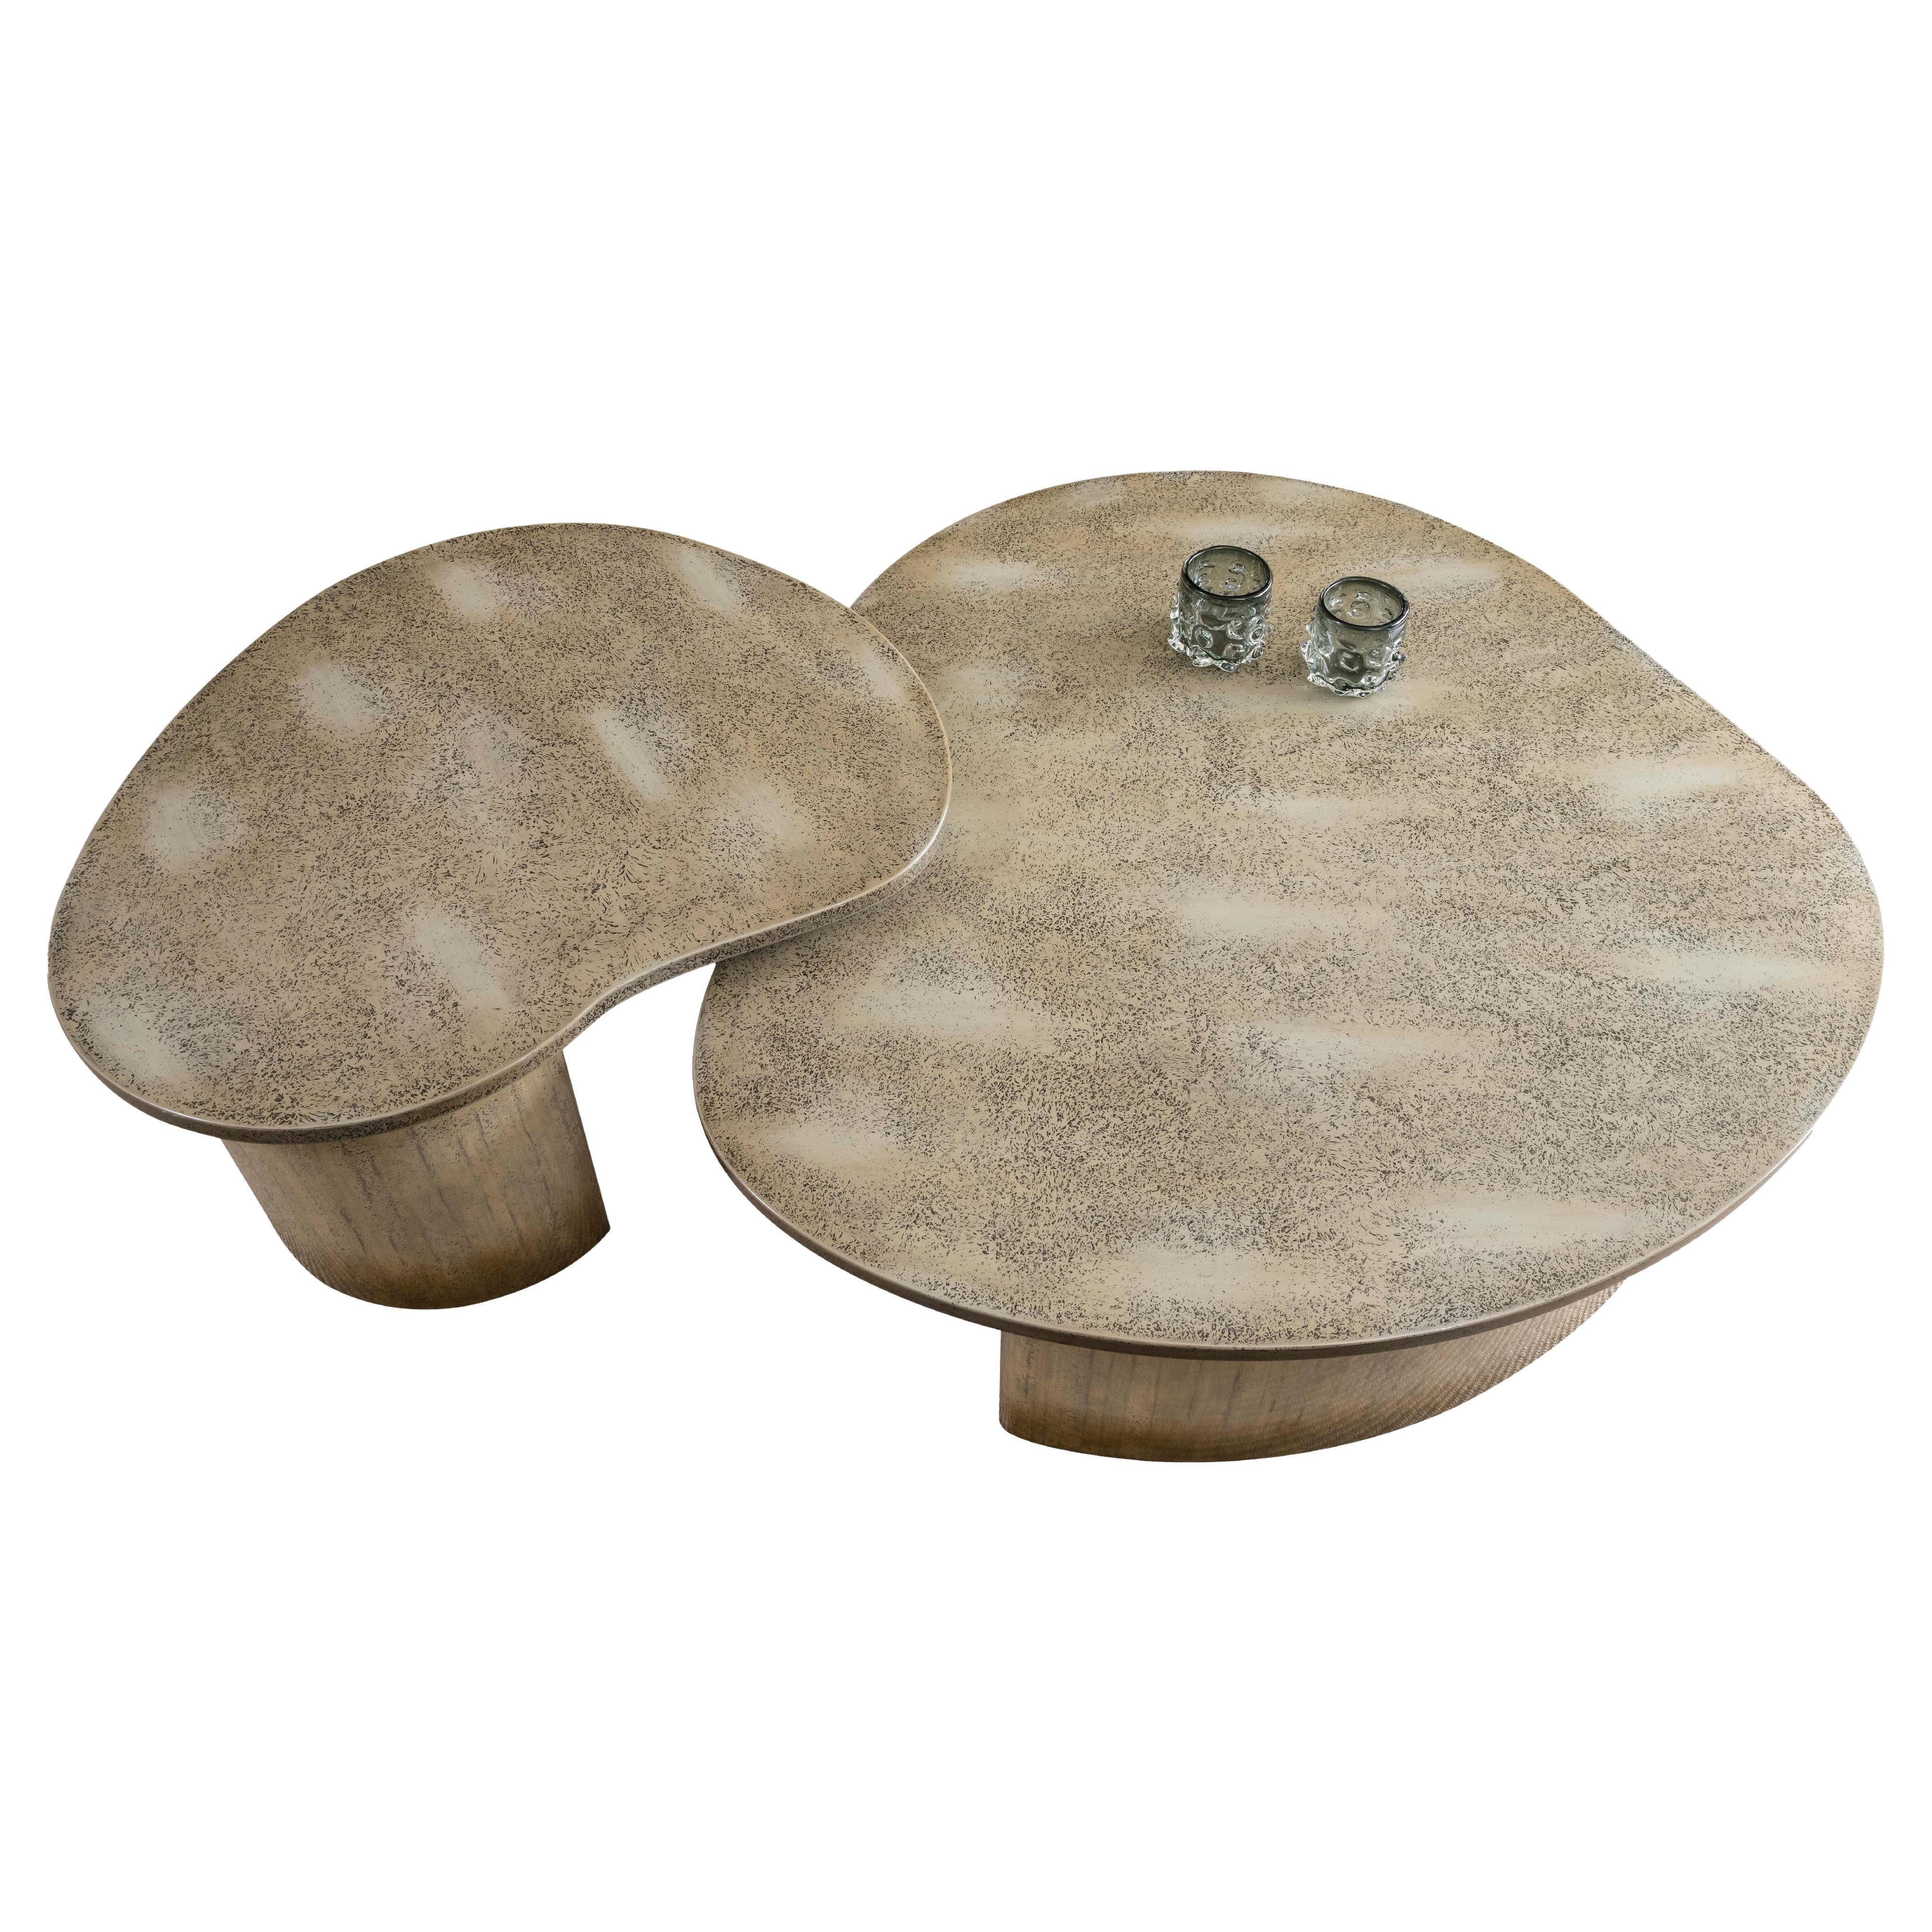 Coffee Table, Lacquered Wood in Handmade Textured Finish, Amorphous 